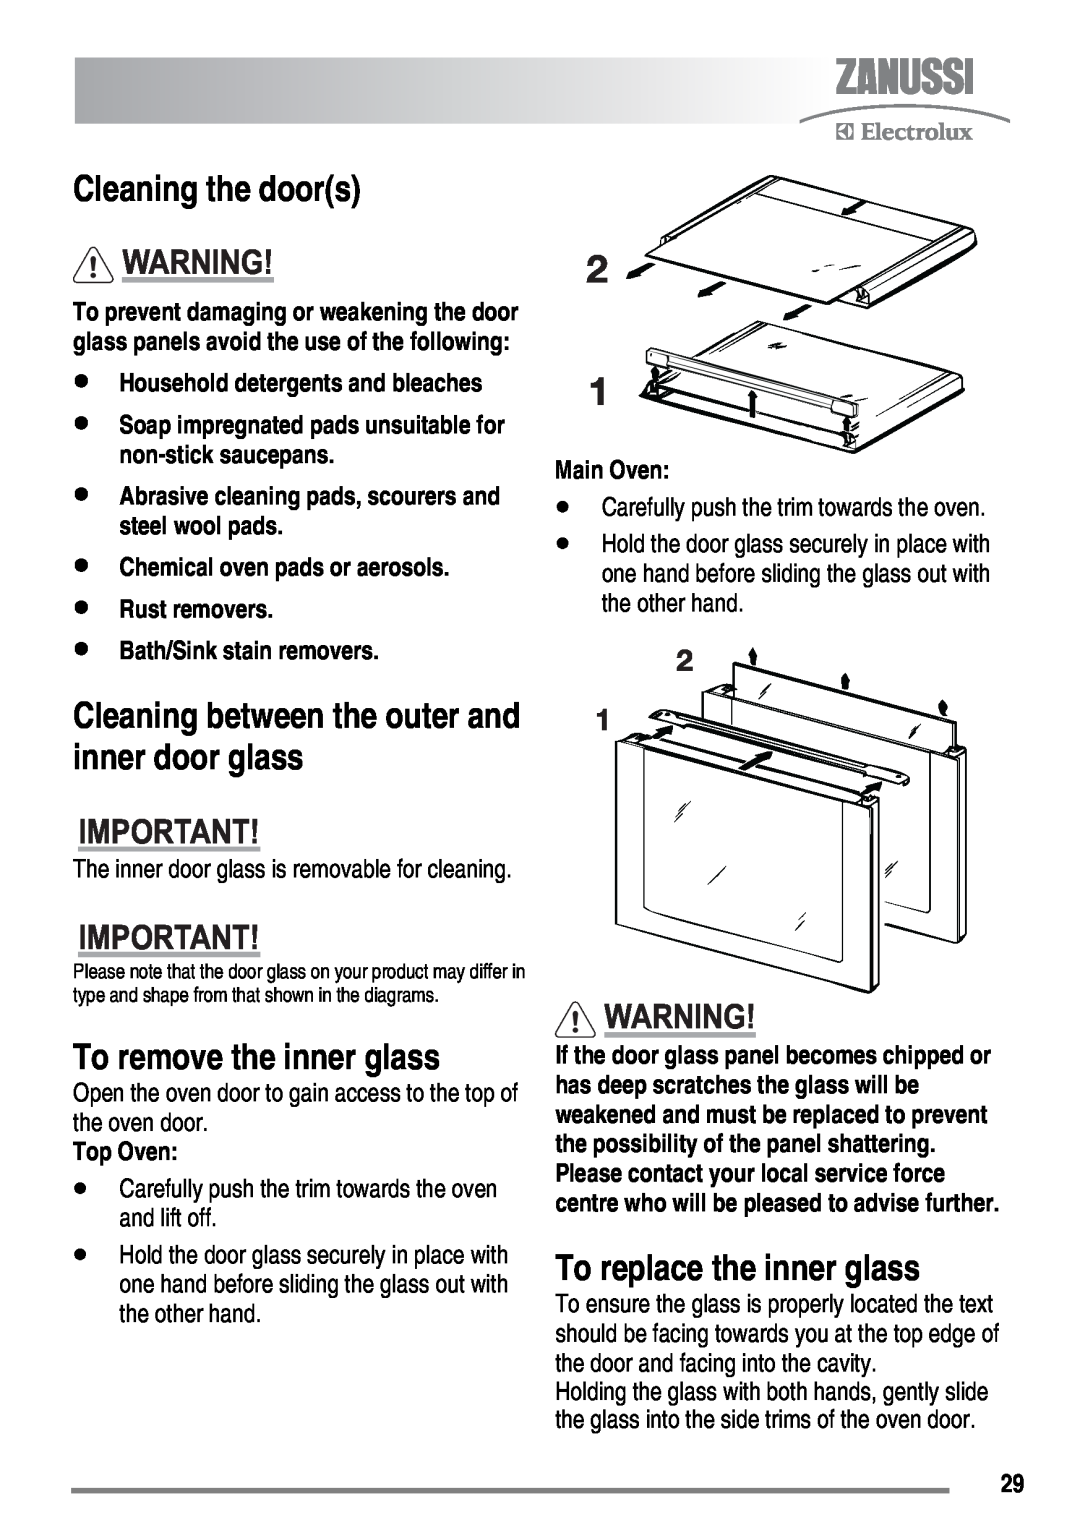 Zanussi ZKG6040 user manual Cleaning the doors, To remove the inner glass, To replace the inner glass, Top Oven, Main Oven 